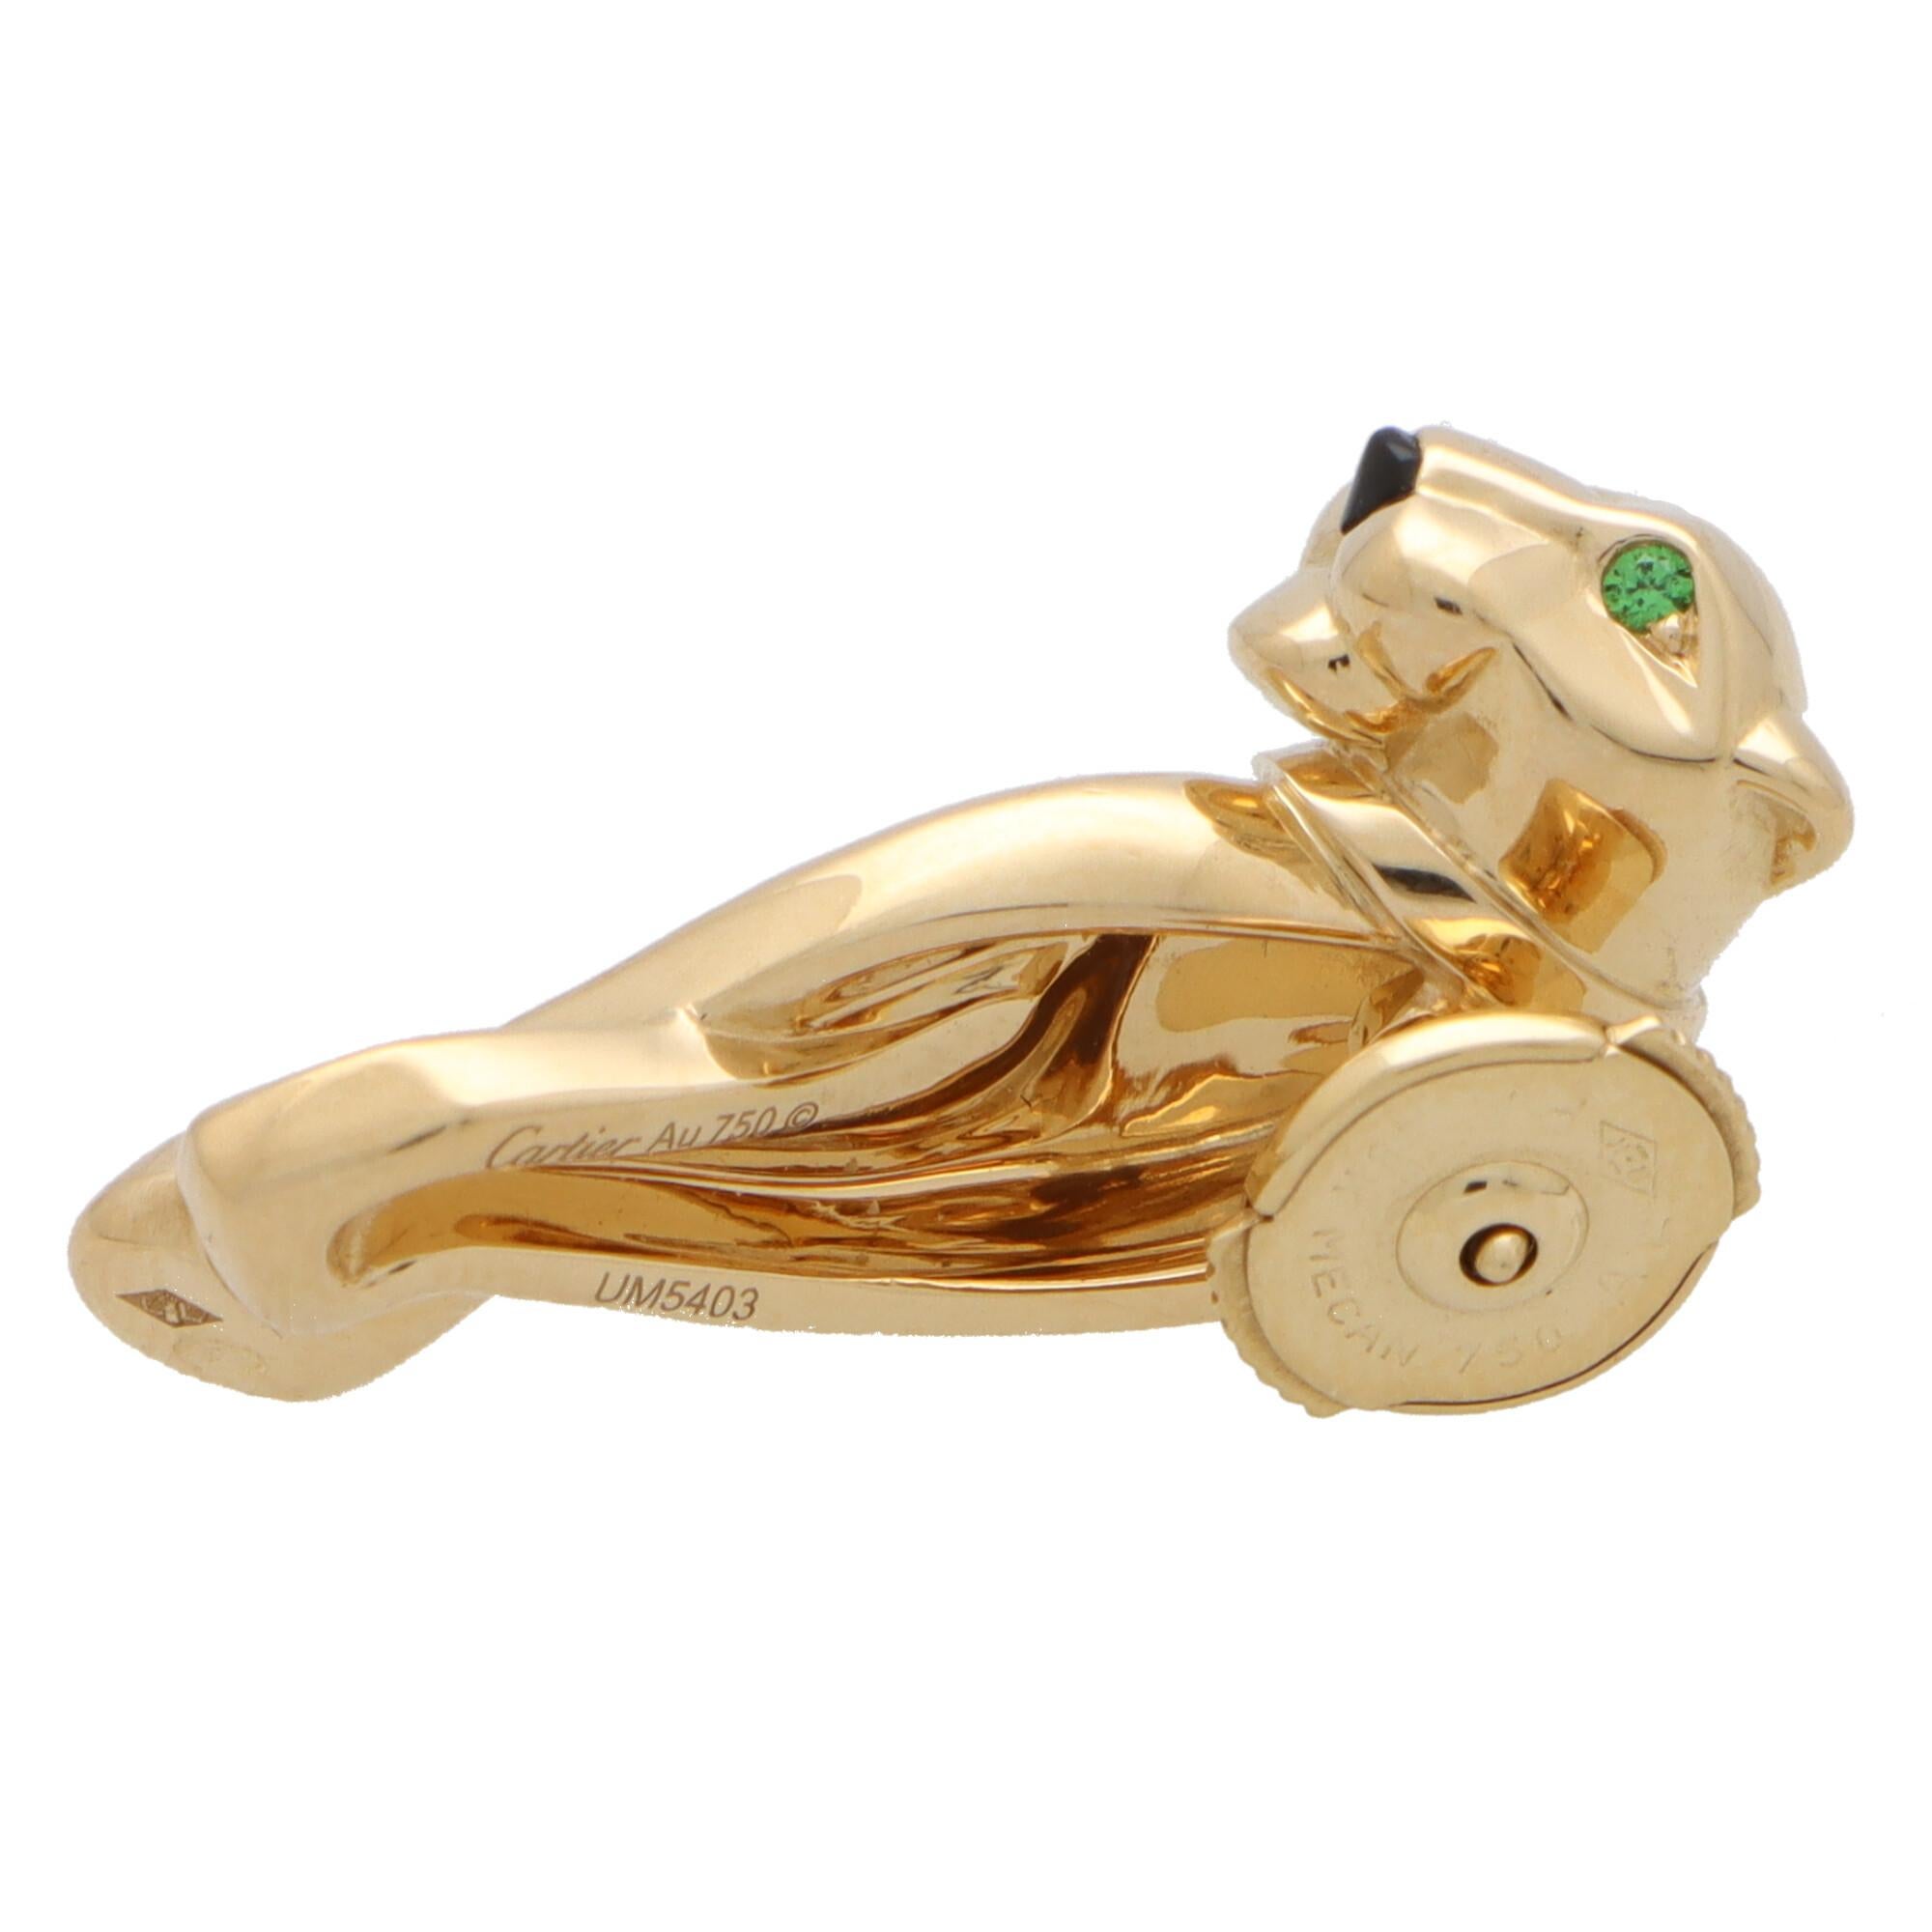 A rare vintage Cartier panther pin brooch set in 18k yellow gold.

This beautiful piece depicts Cartier’s iconic panther motif and is made of solid 18k yellow gold. The panther face is set with two round cut tsavorite garnet eyes and a onyx nose and